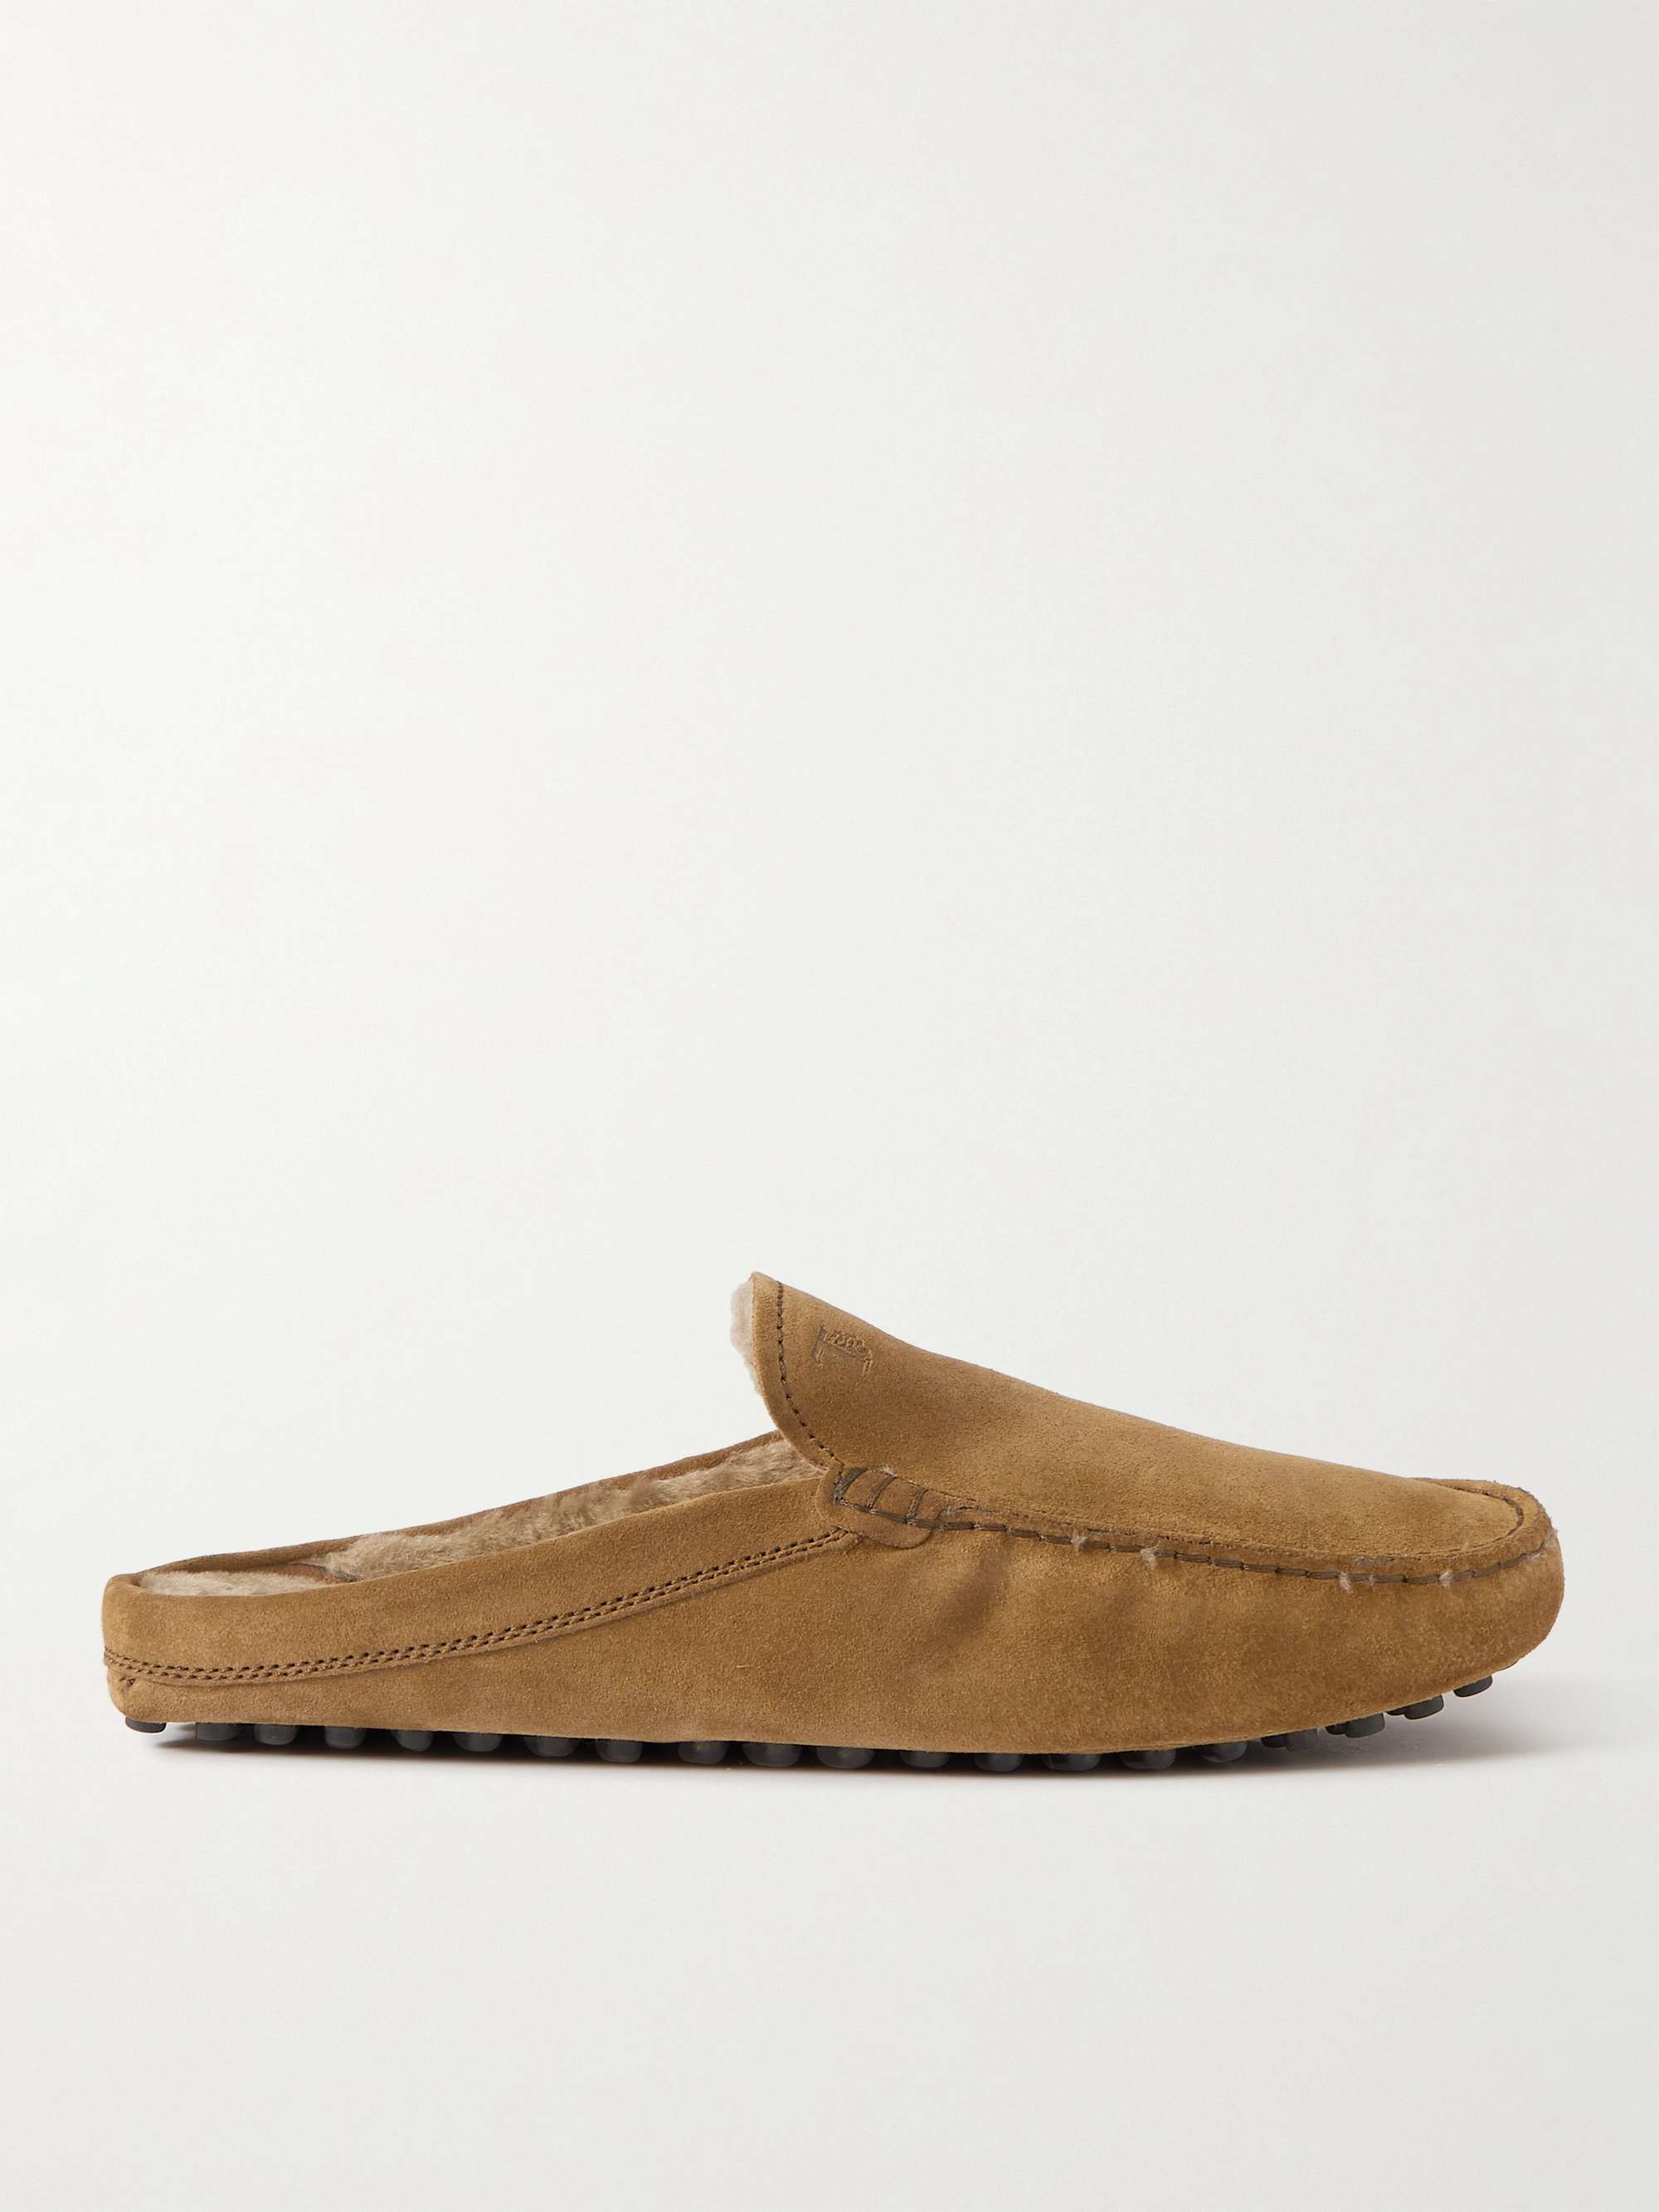 TOD'S Shearling-Lined Suede Slippers